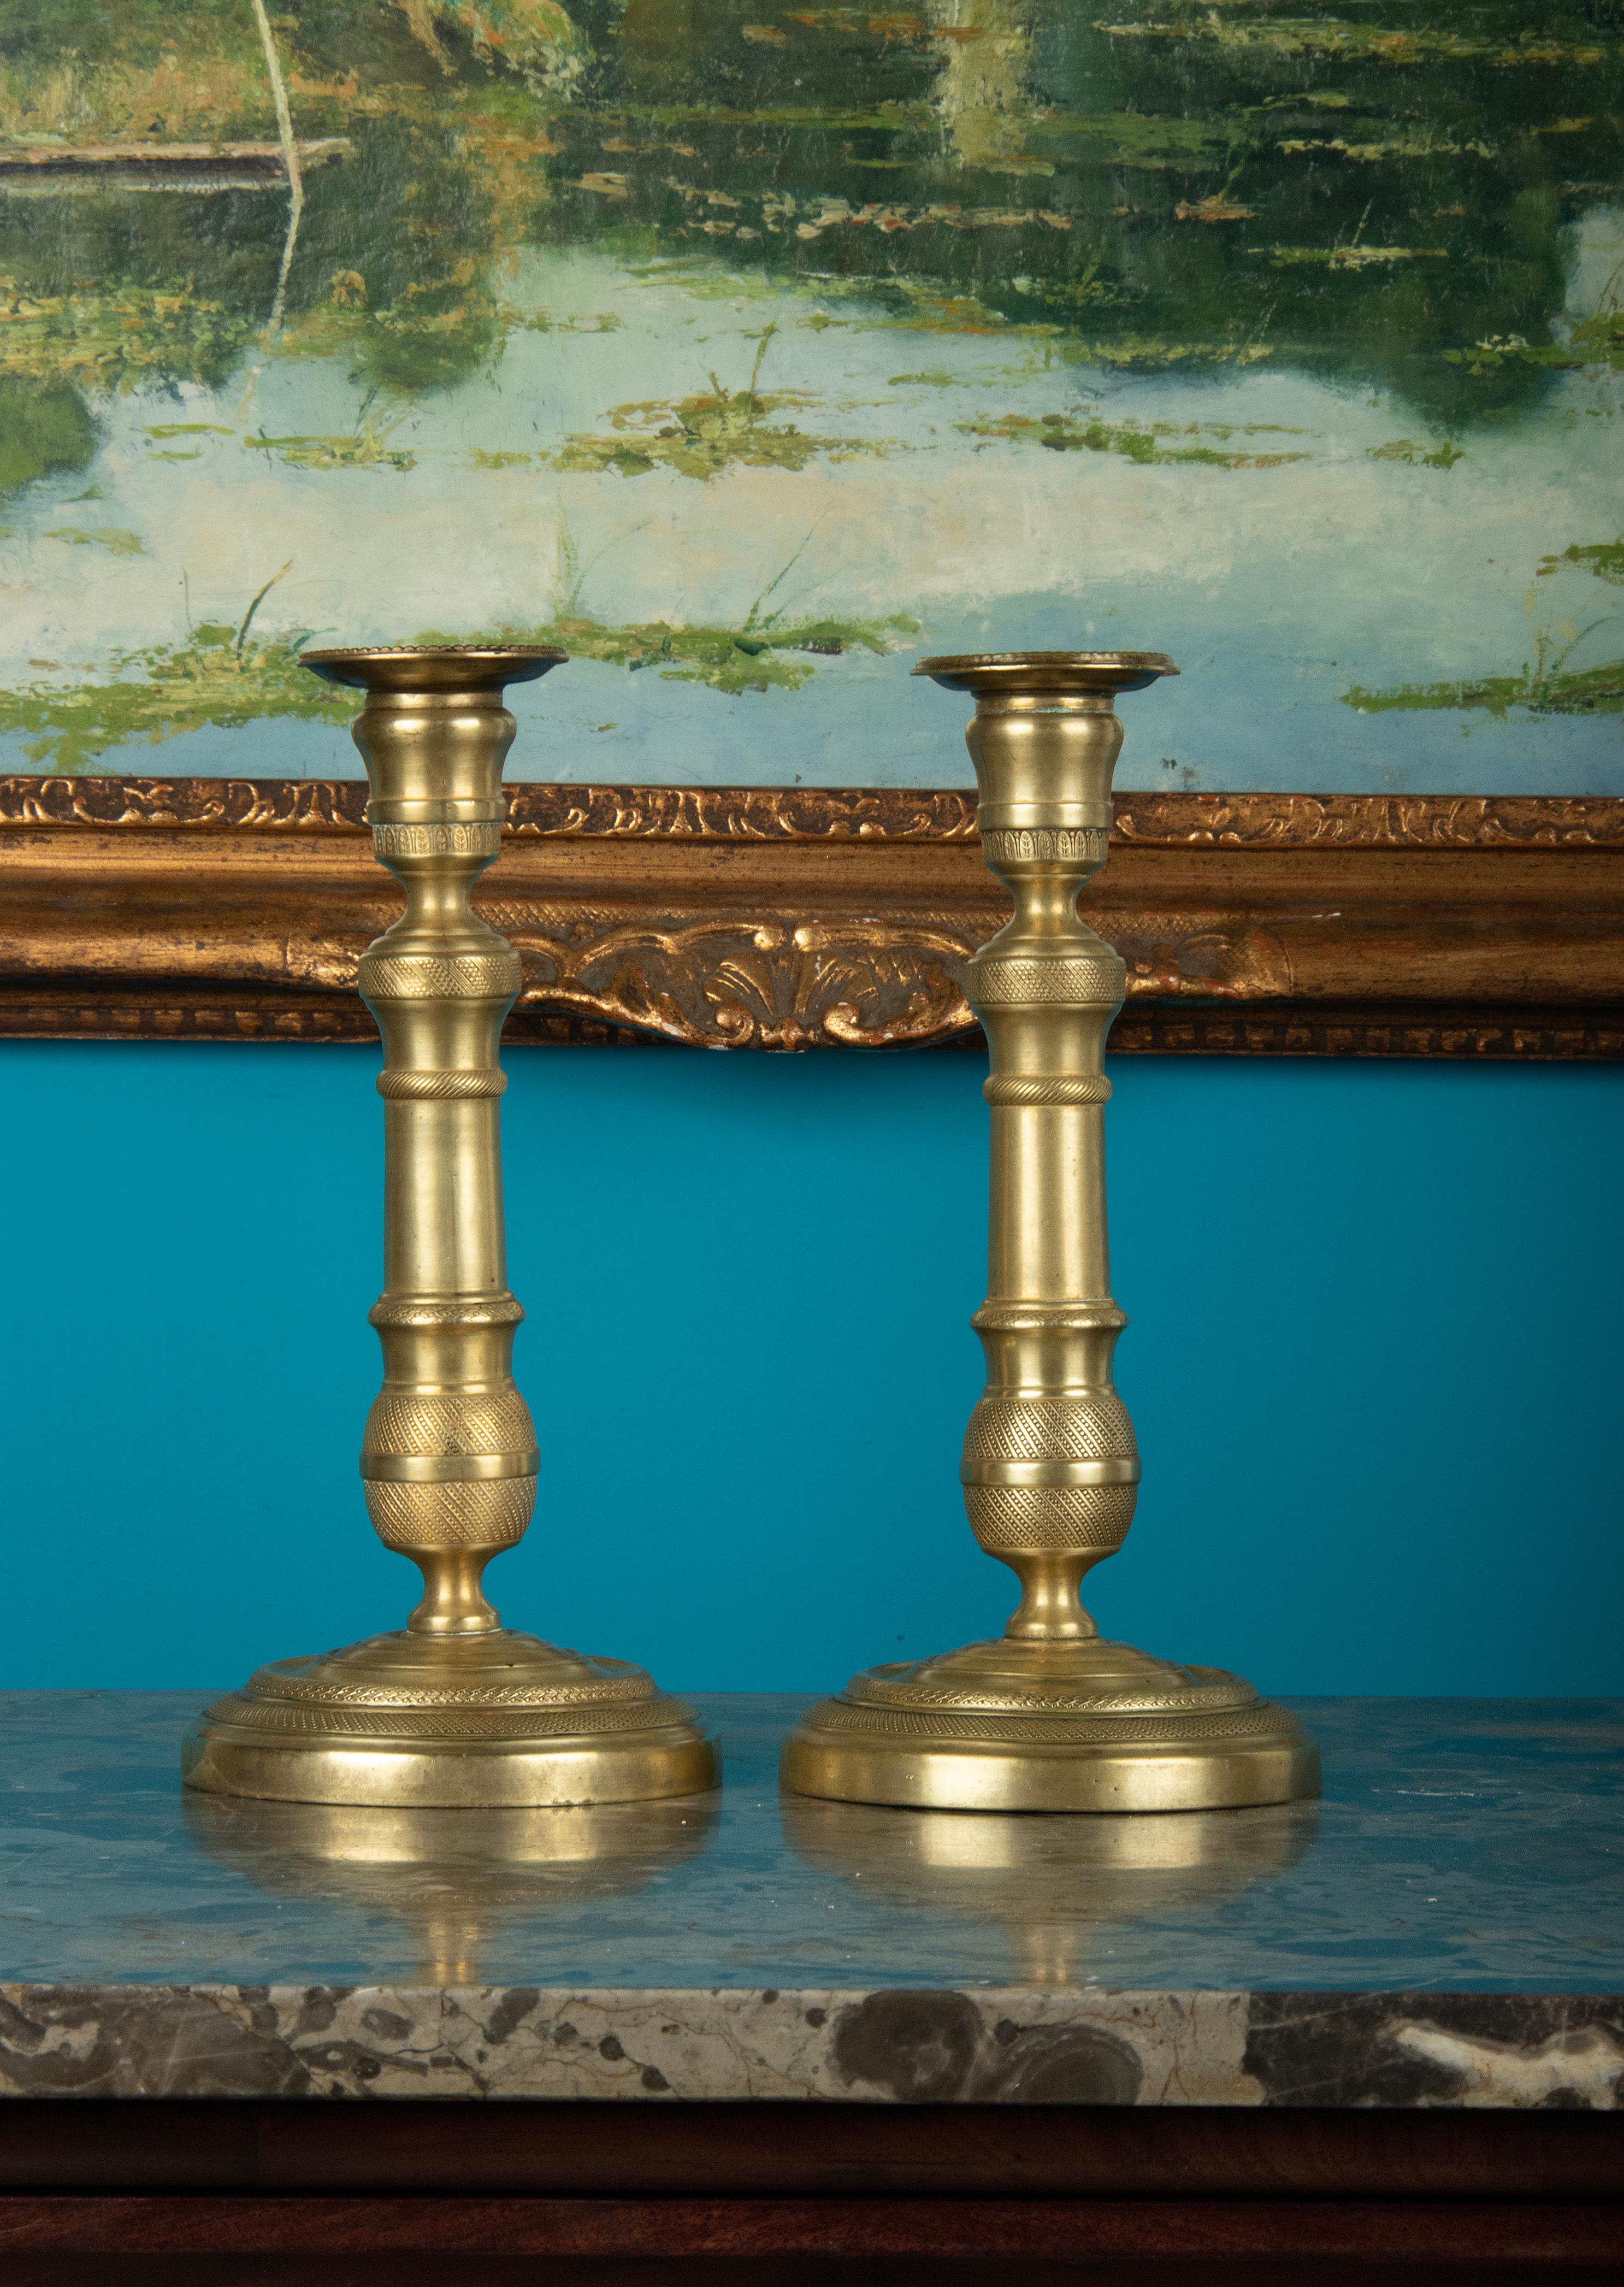 A pair of brass candlesticks. Beautifully decorated with refined silicery in Louis XVI style. The candlesticks date from around 1880-1890, originating from France.